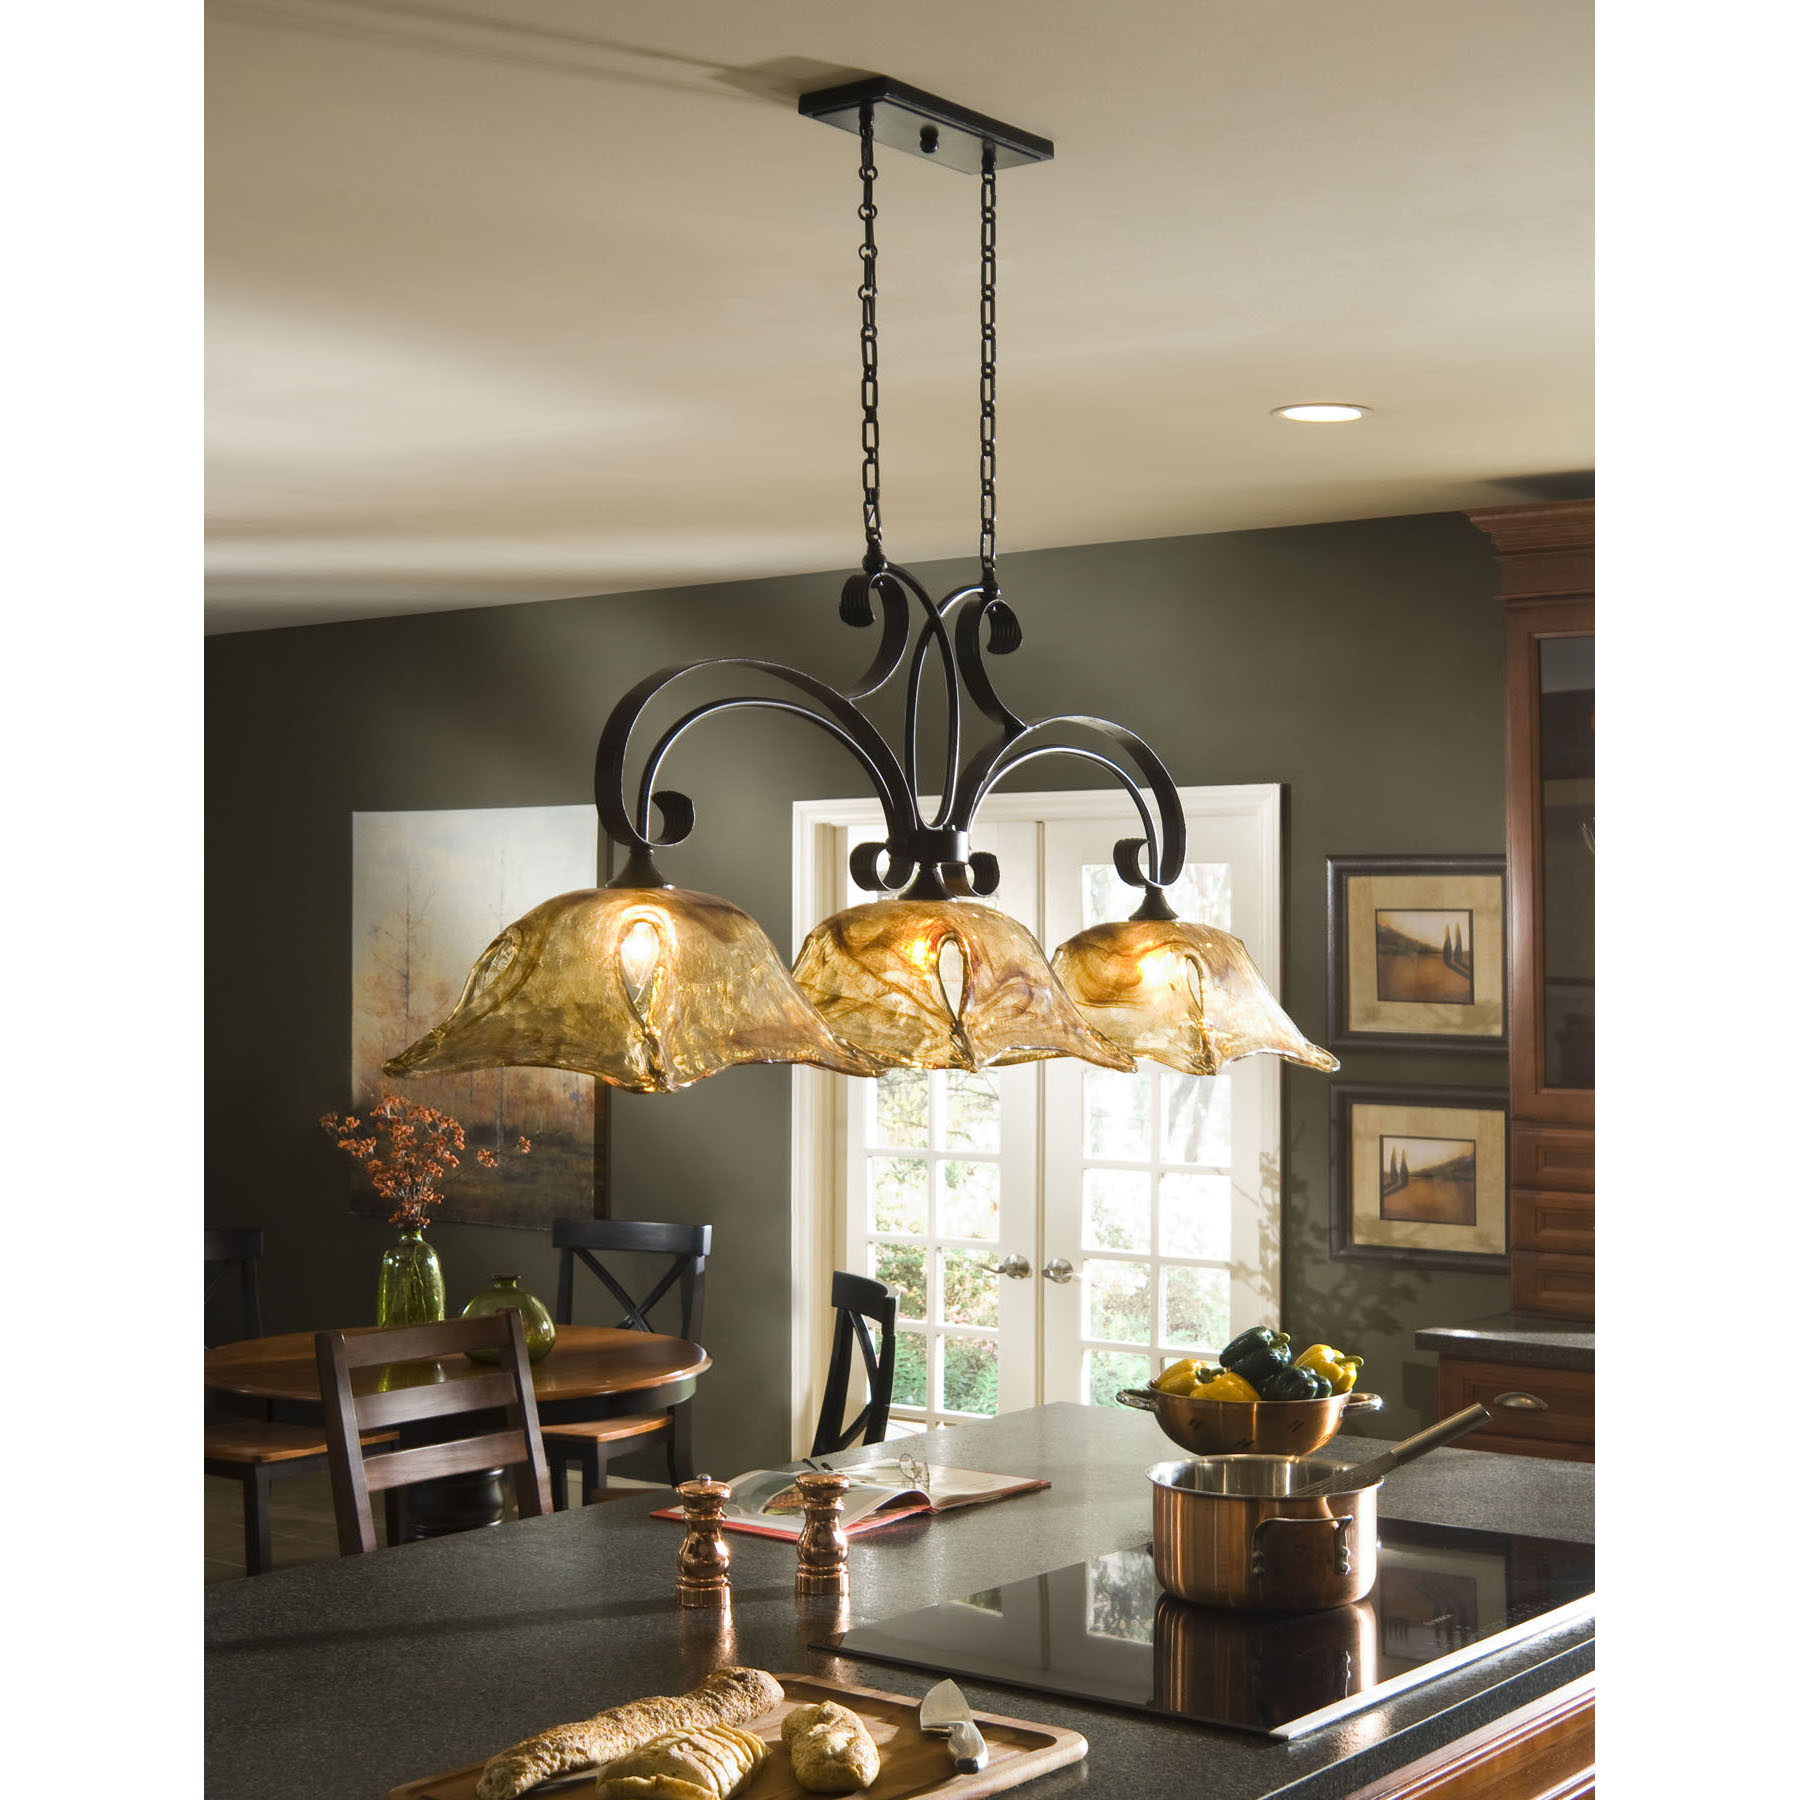 Light Fixture for Kitchen island Luxury A Tip Sheet On How the Right Lighting Can Make the Kitchen